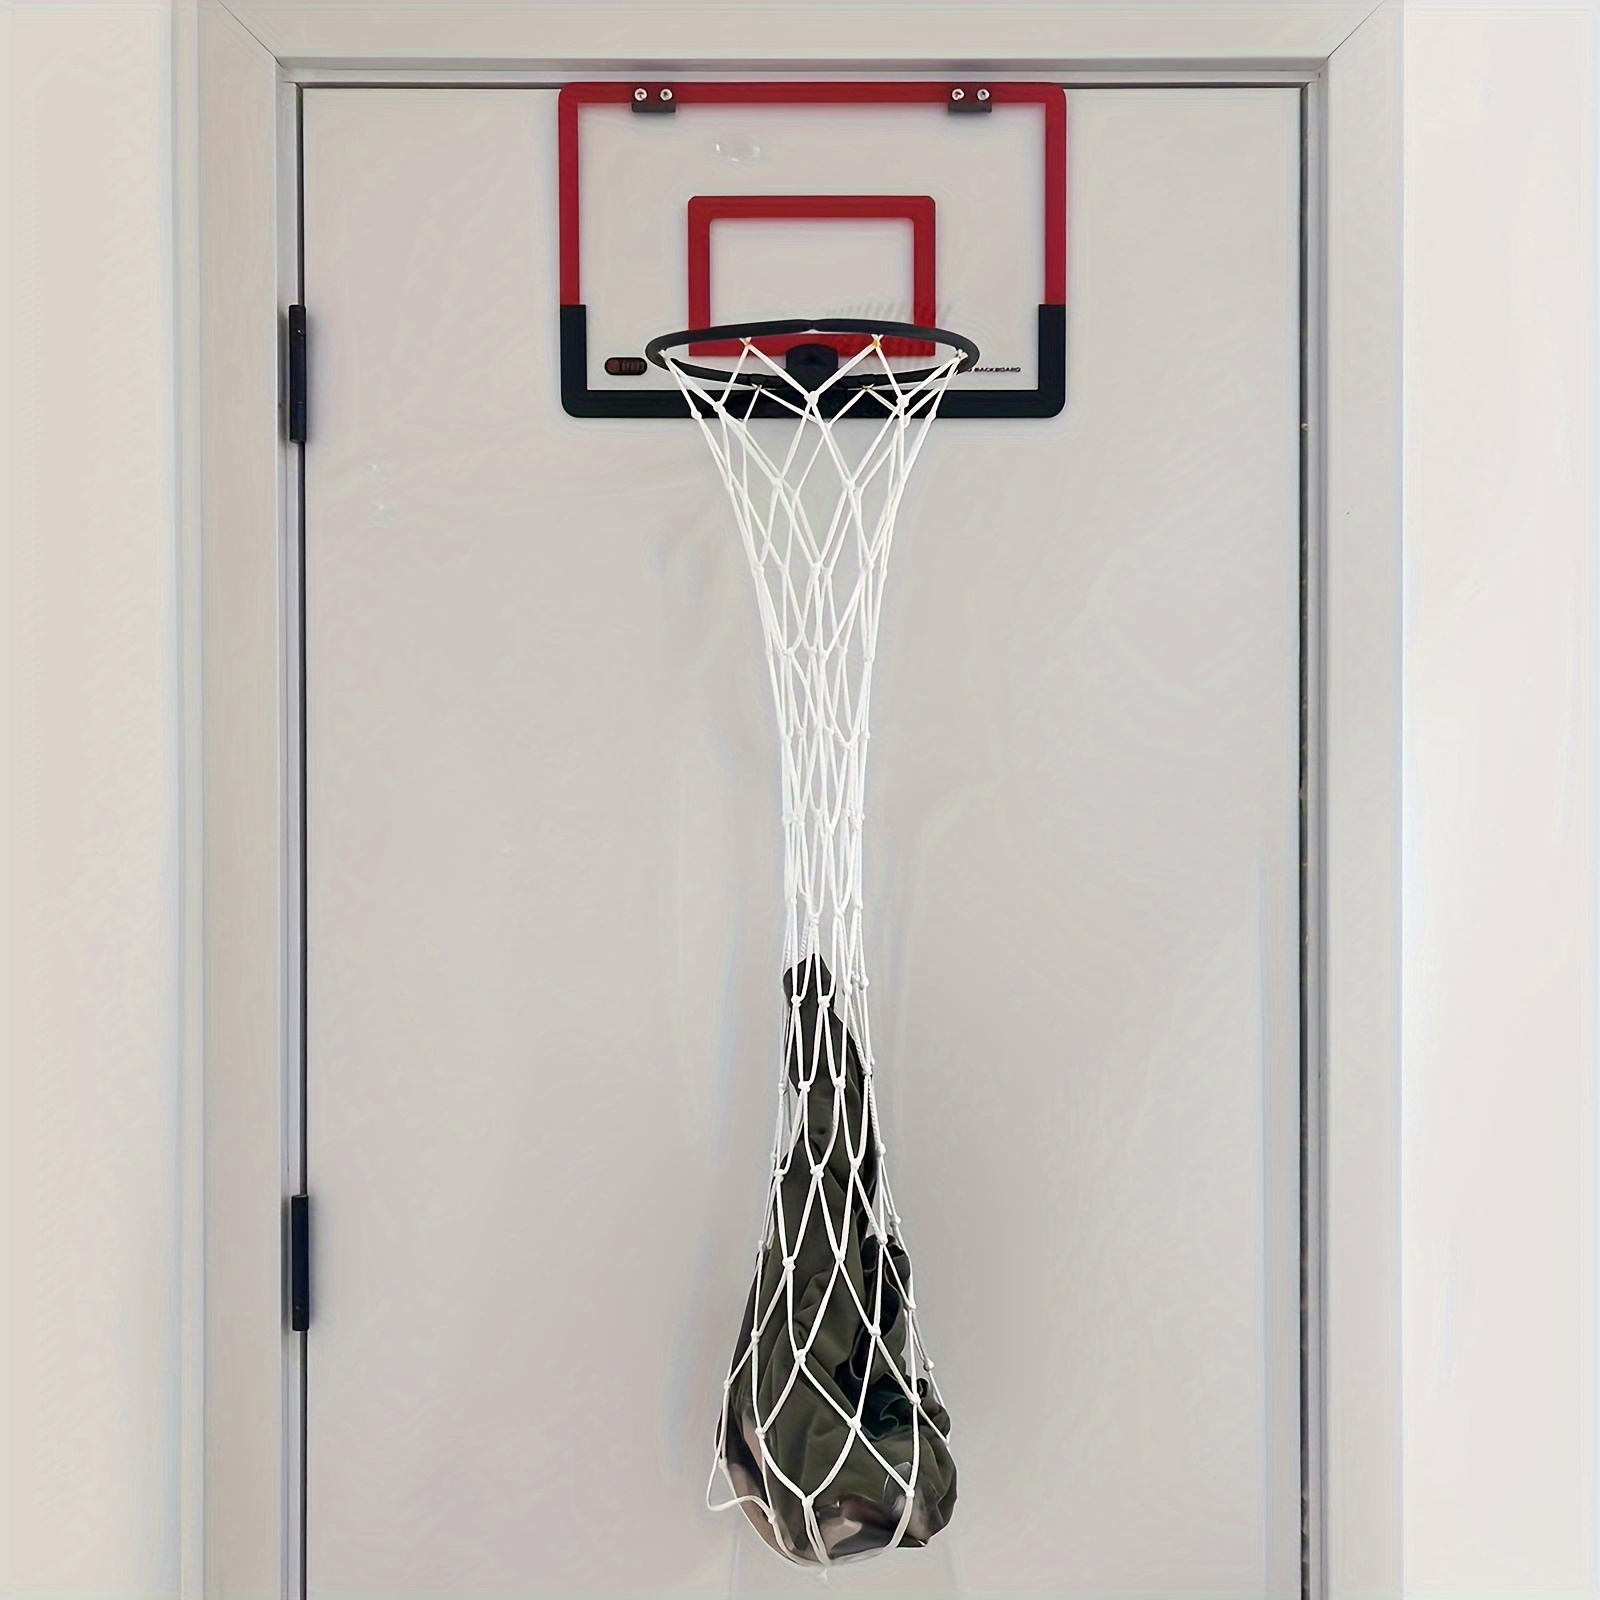 

1pc Basketball Laundry Hamper - Over The Door 2 In 1 Hanging Basketball Hoop Or Laundry Hamper Youth Room Decor - Fun Gift